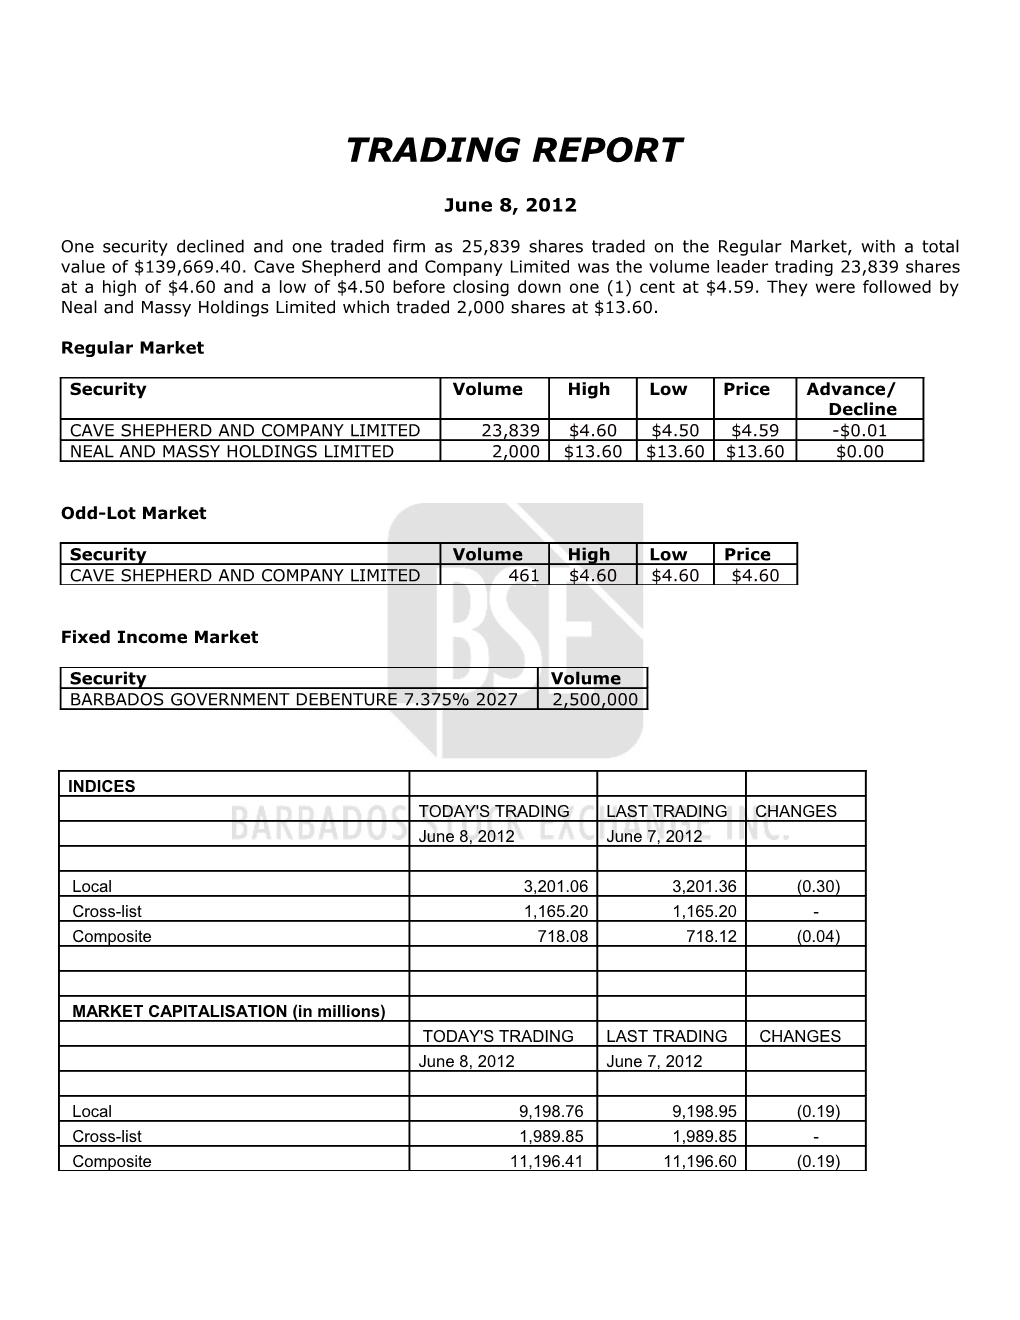 Trading Report s31